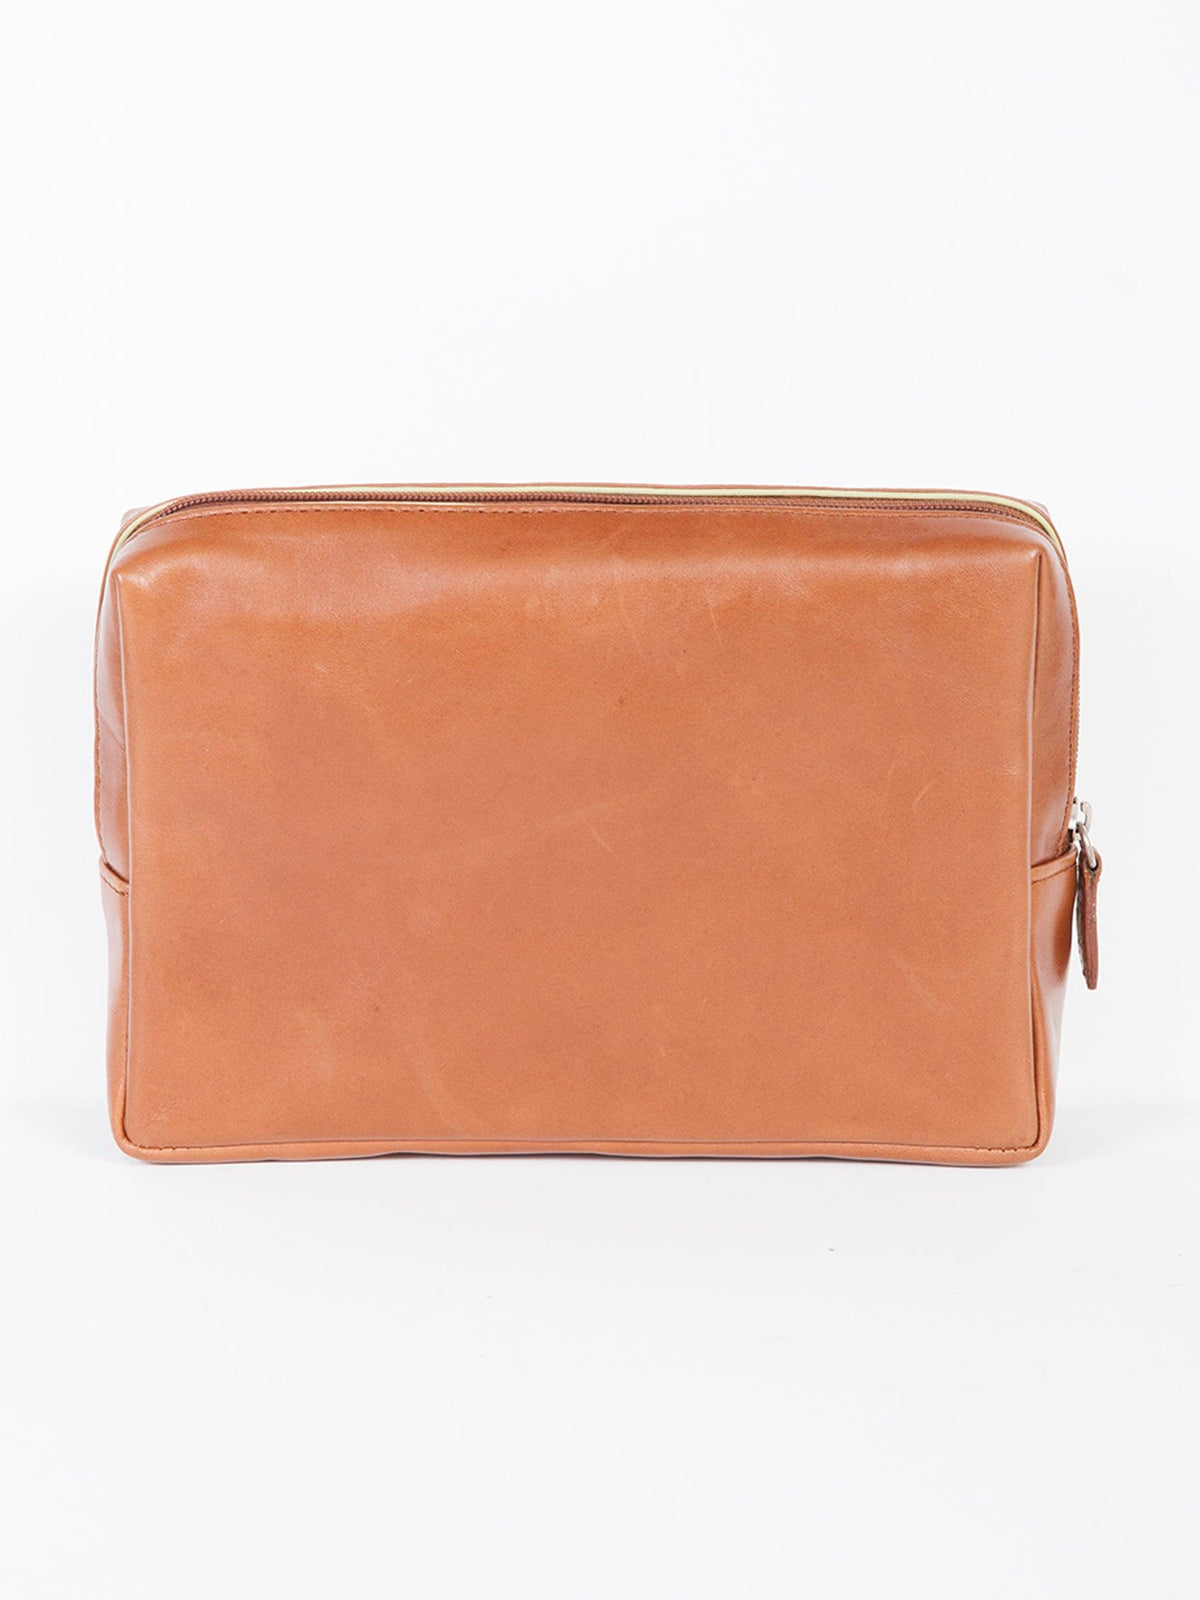 Scully BROWN COSMETIC BAG - Flyclothing LLC